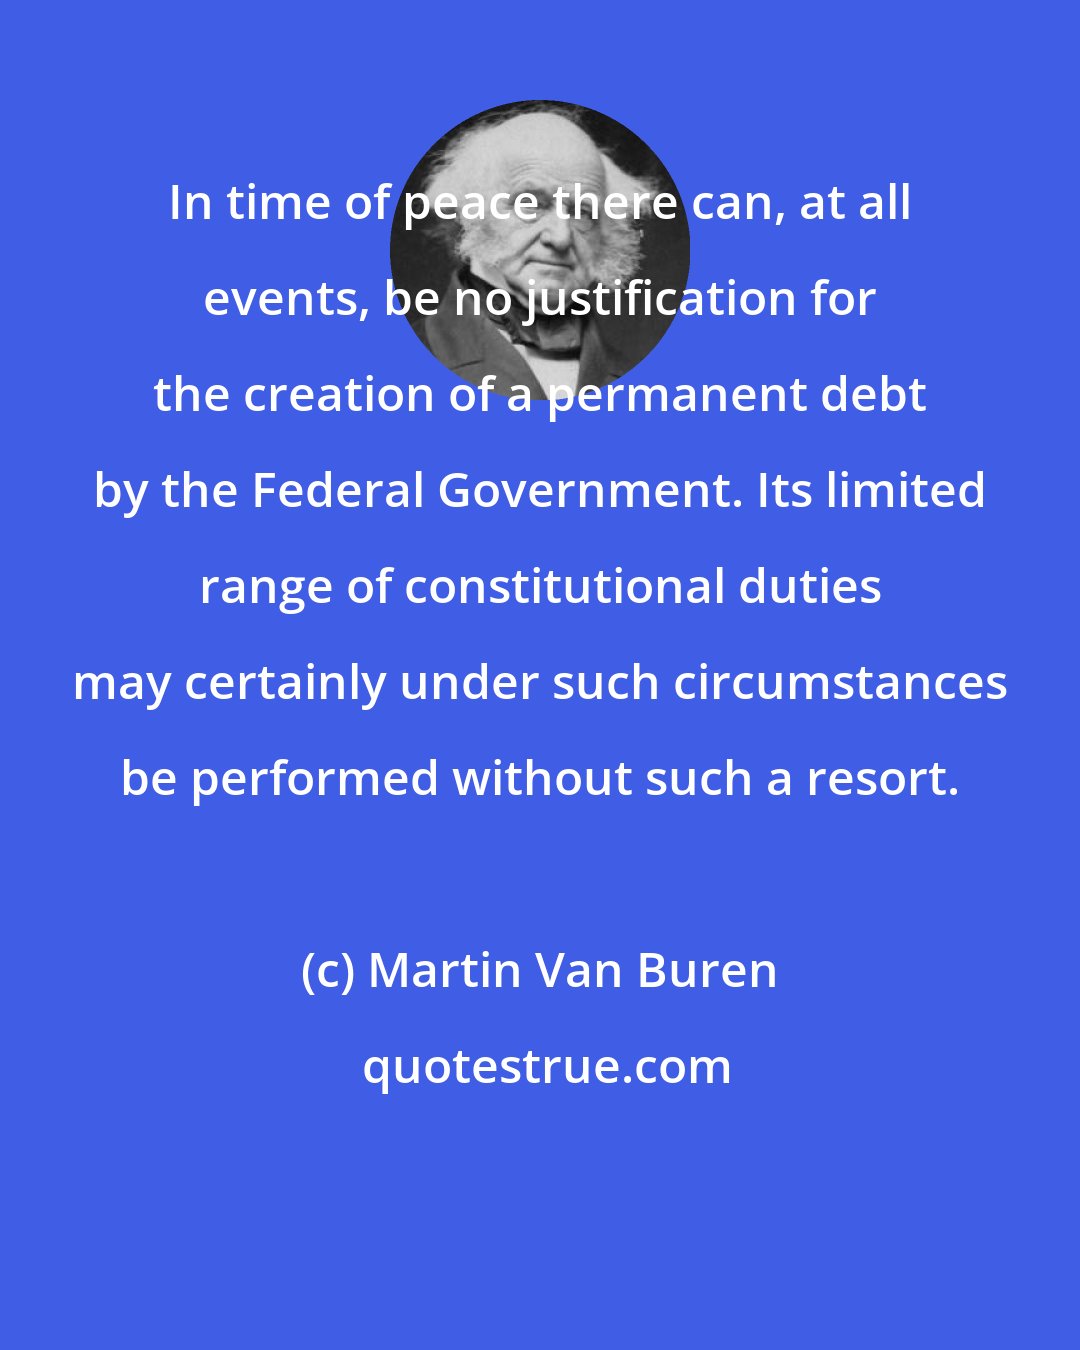 Martin Van Buren: In time of peace there can, at all events, be no justification for the creation of a permanent debt by the Federal Government. Its limited range of constitutional duties may certainly under such circumstances be performed without such a resort.